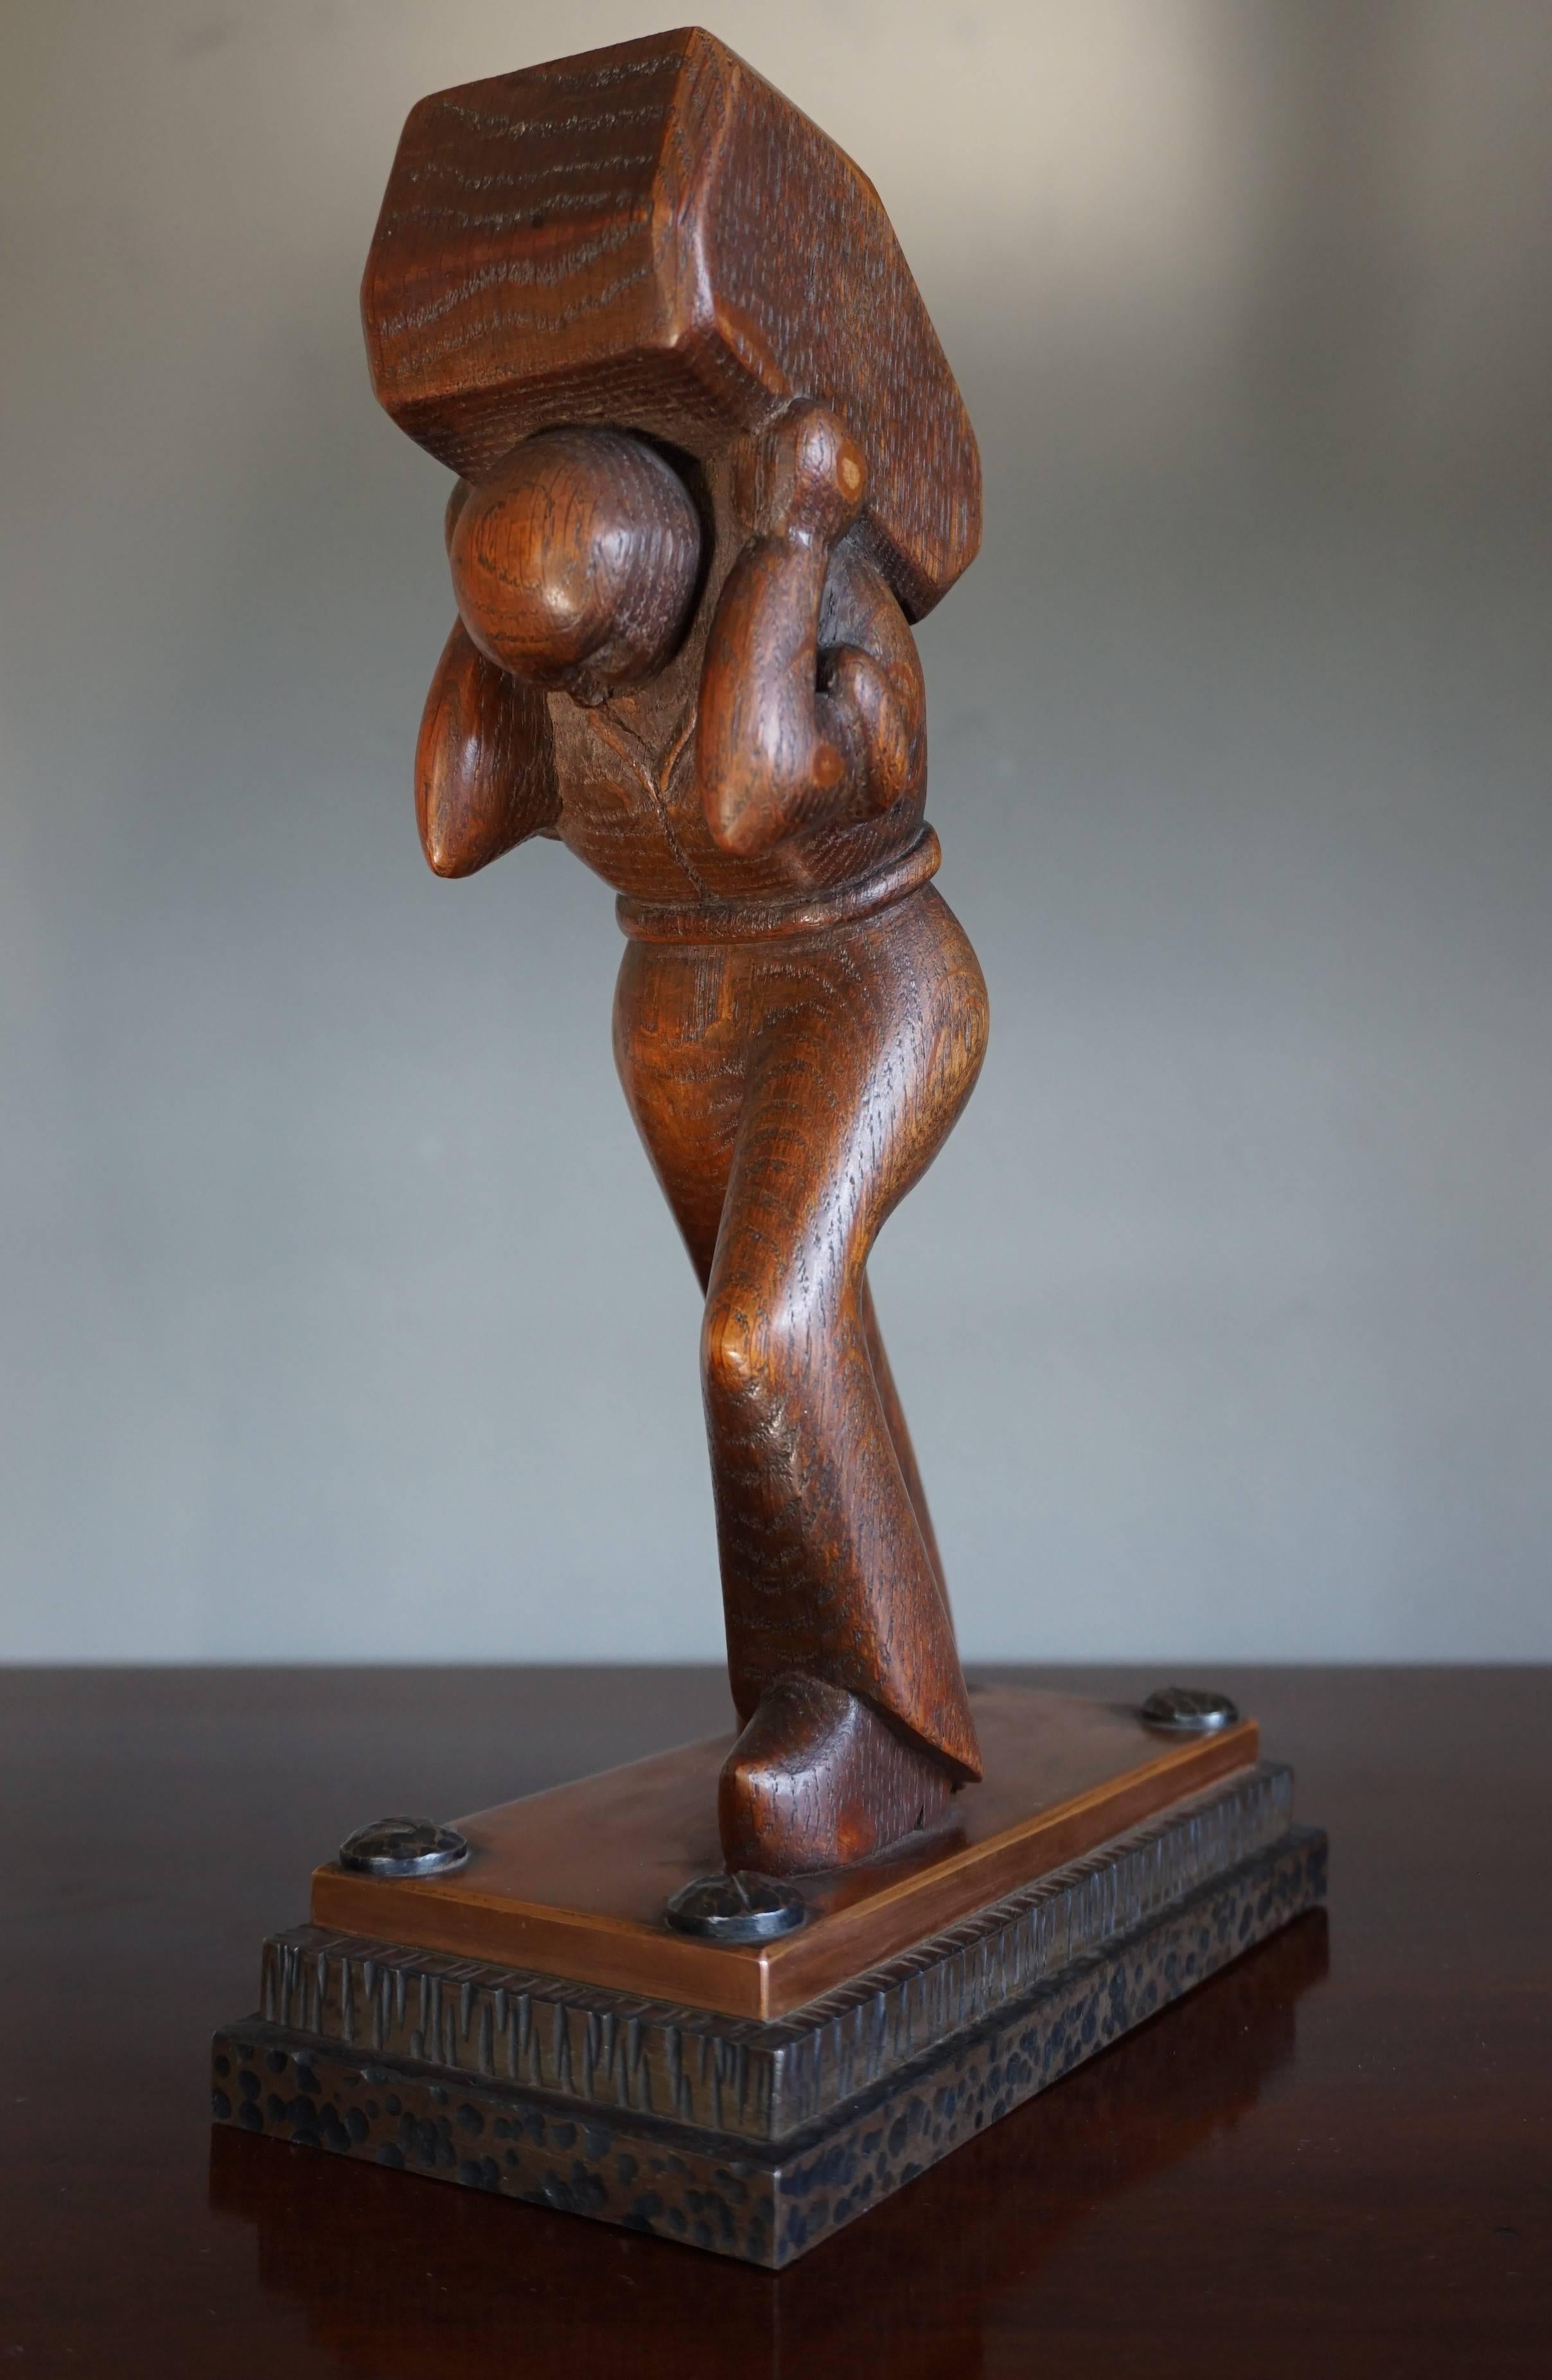 Stylized 1920s sculpture of a 'working class hero'.

This unique work of art from the early 20th century immediately caught our attention. The powerful statement that the artist has made with this incredibly stylish and strong sculpture leaves a